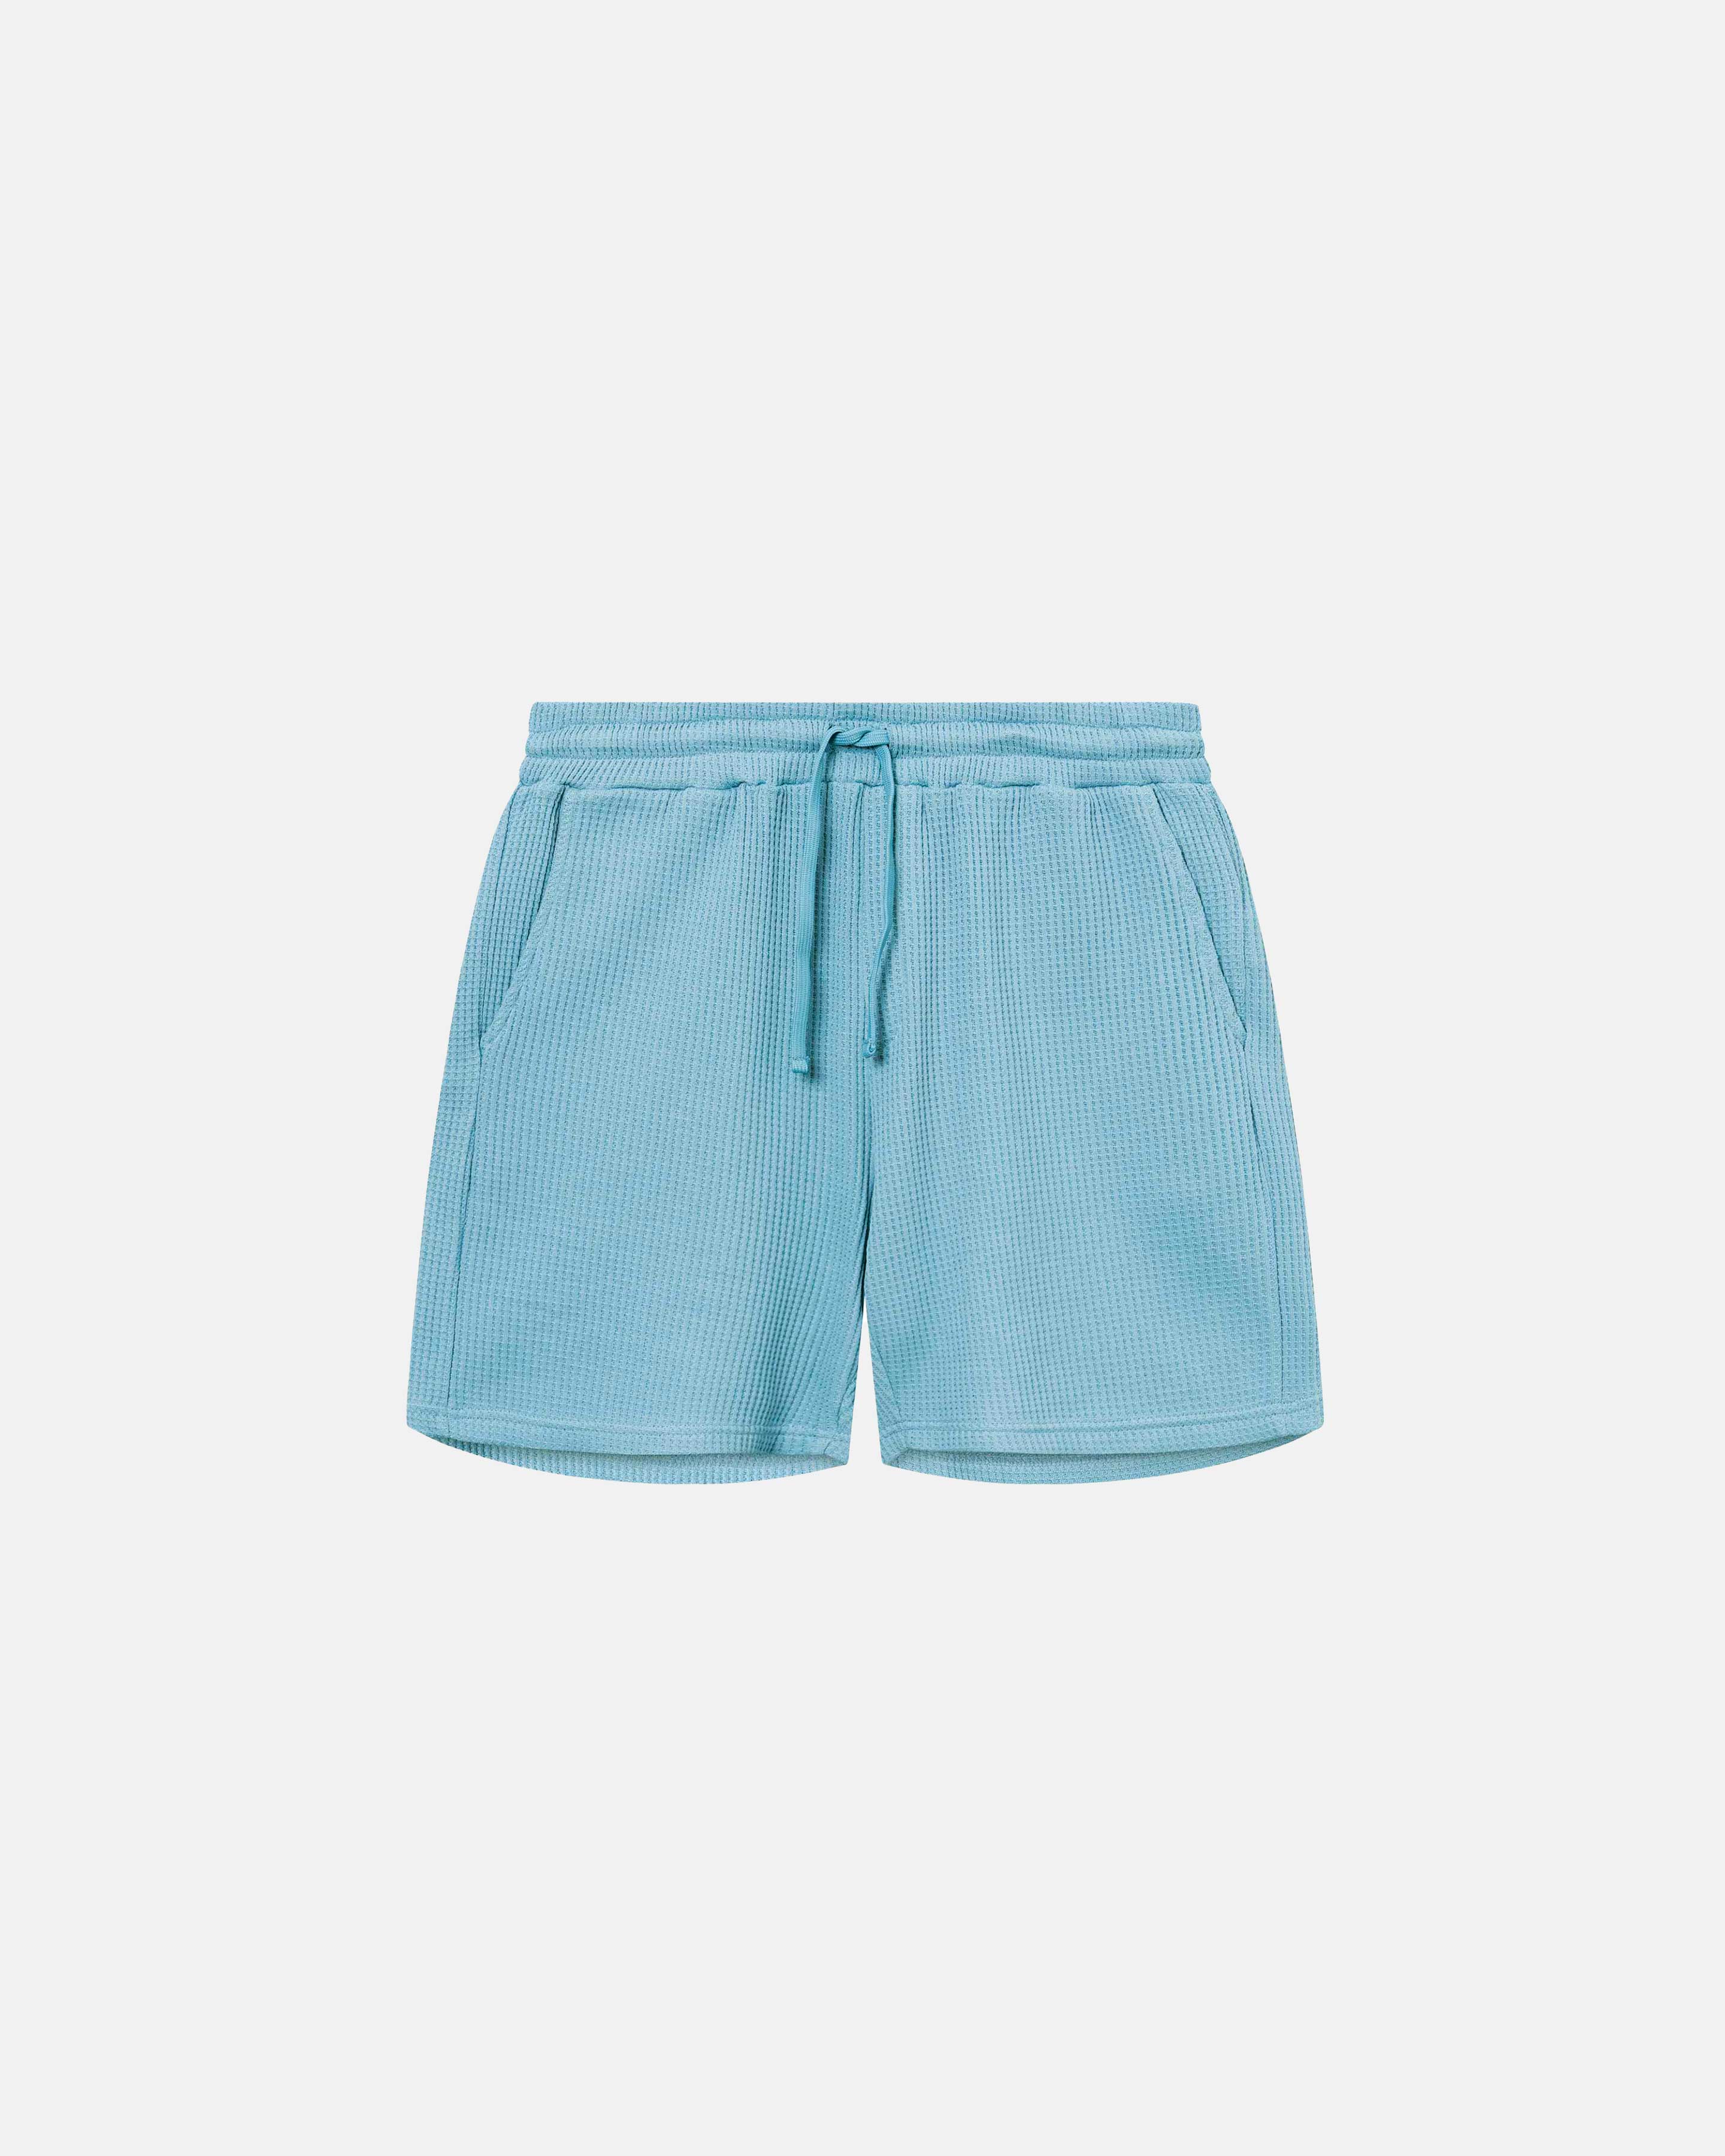 Sky blue waffle-patterned mid-length shorts with two front pockets and a drawstring.